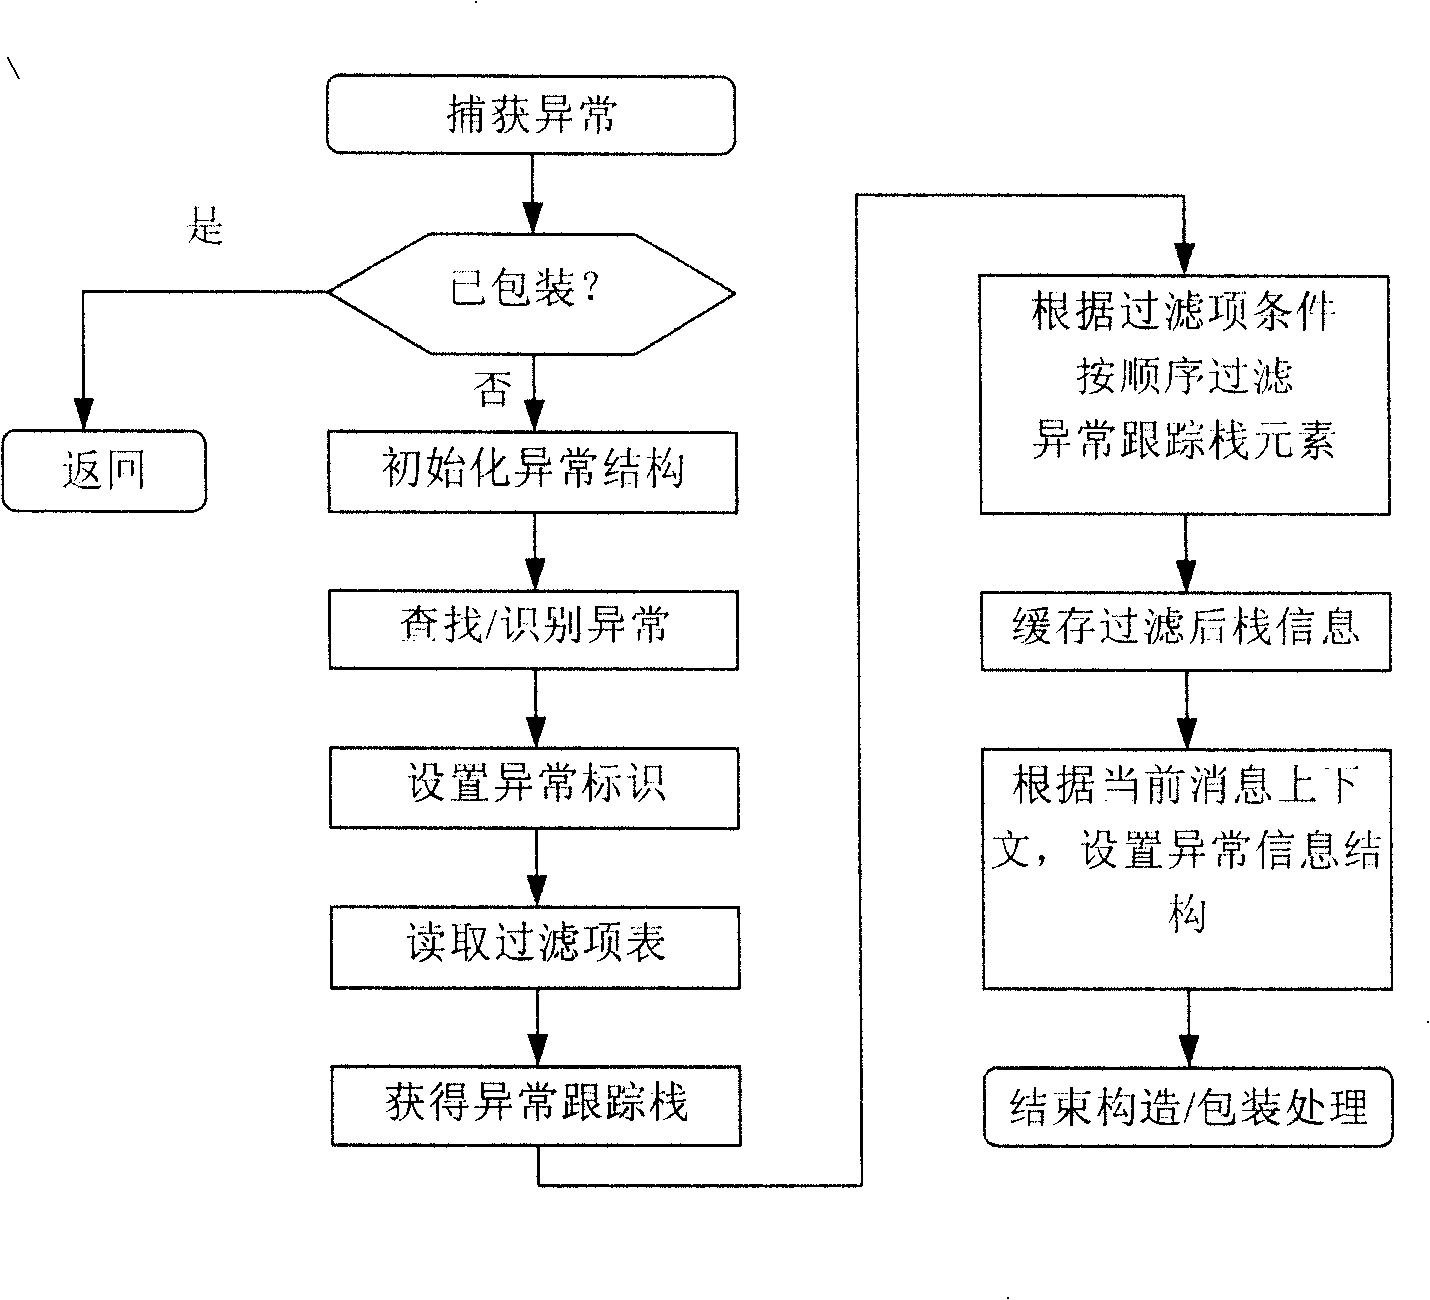 Message level processing method in service system structure